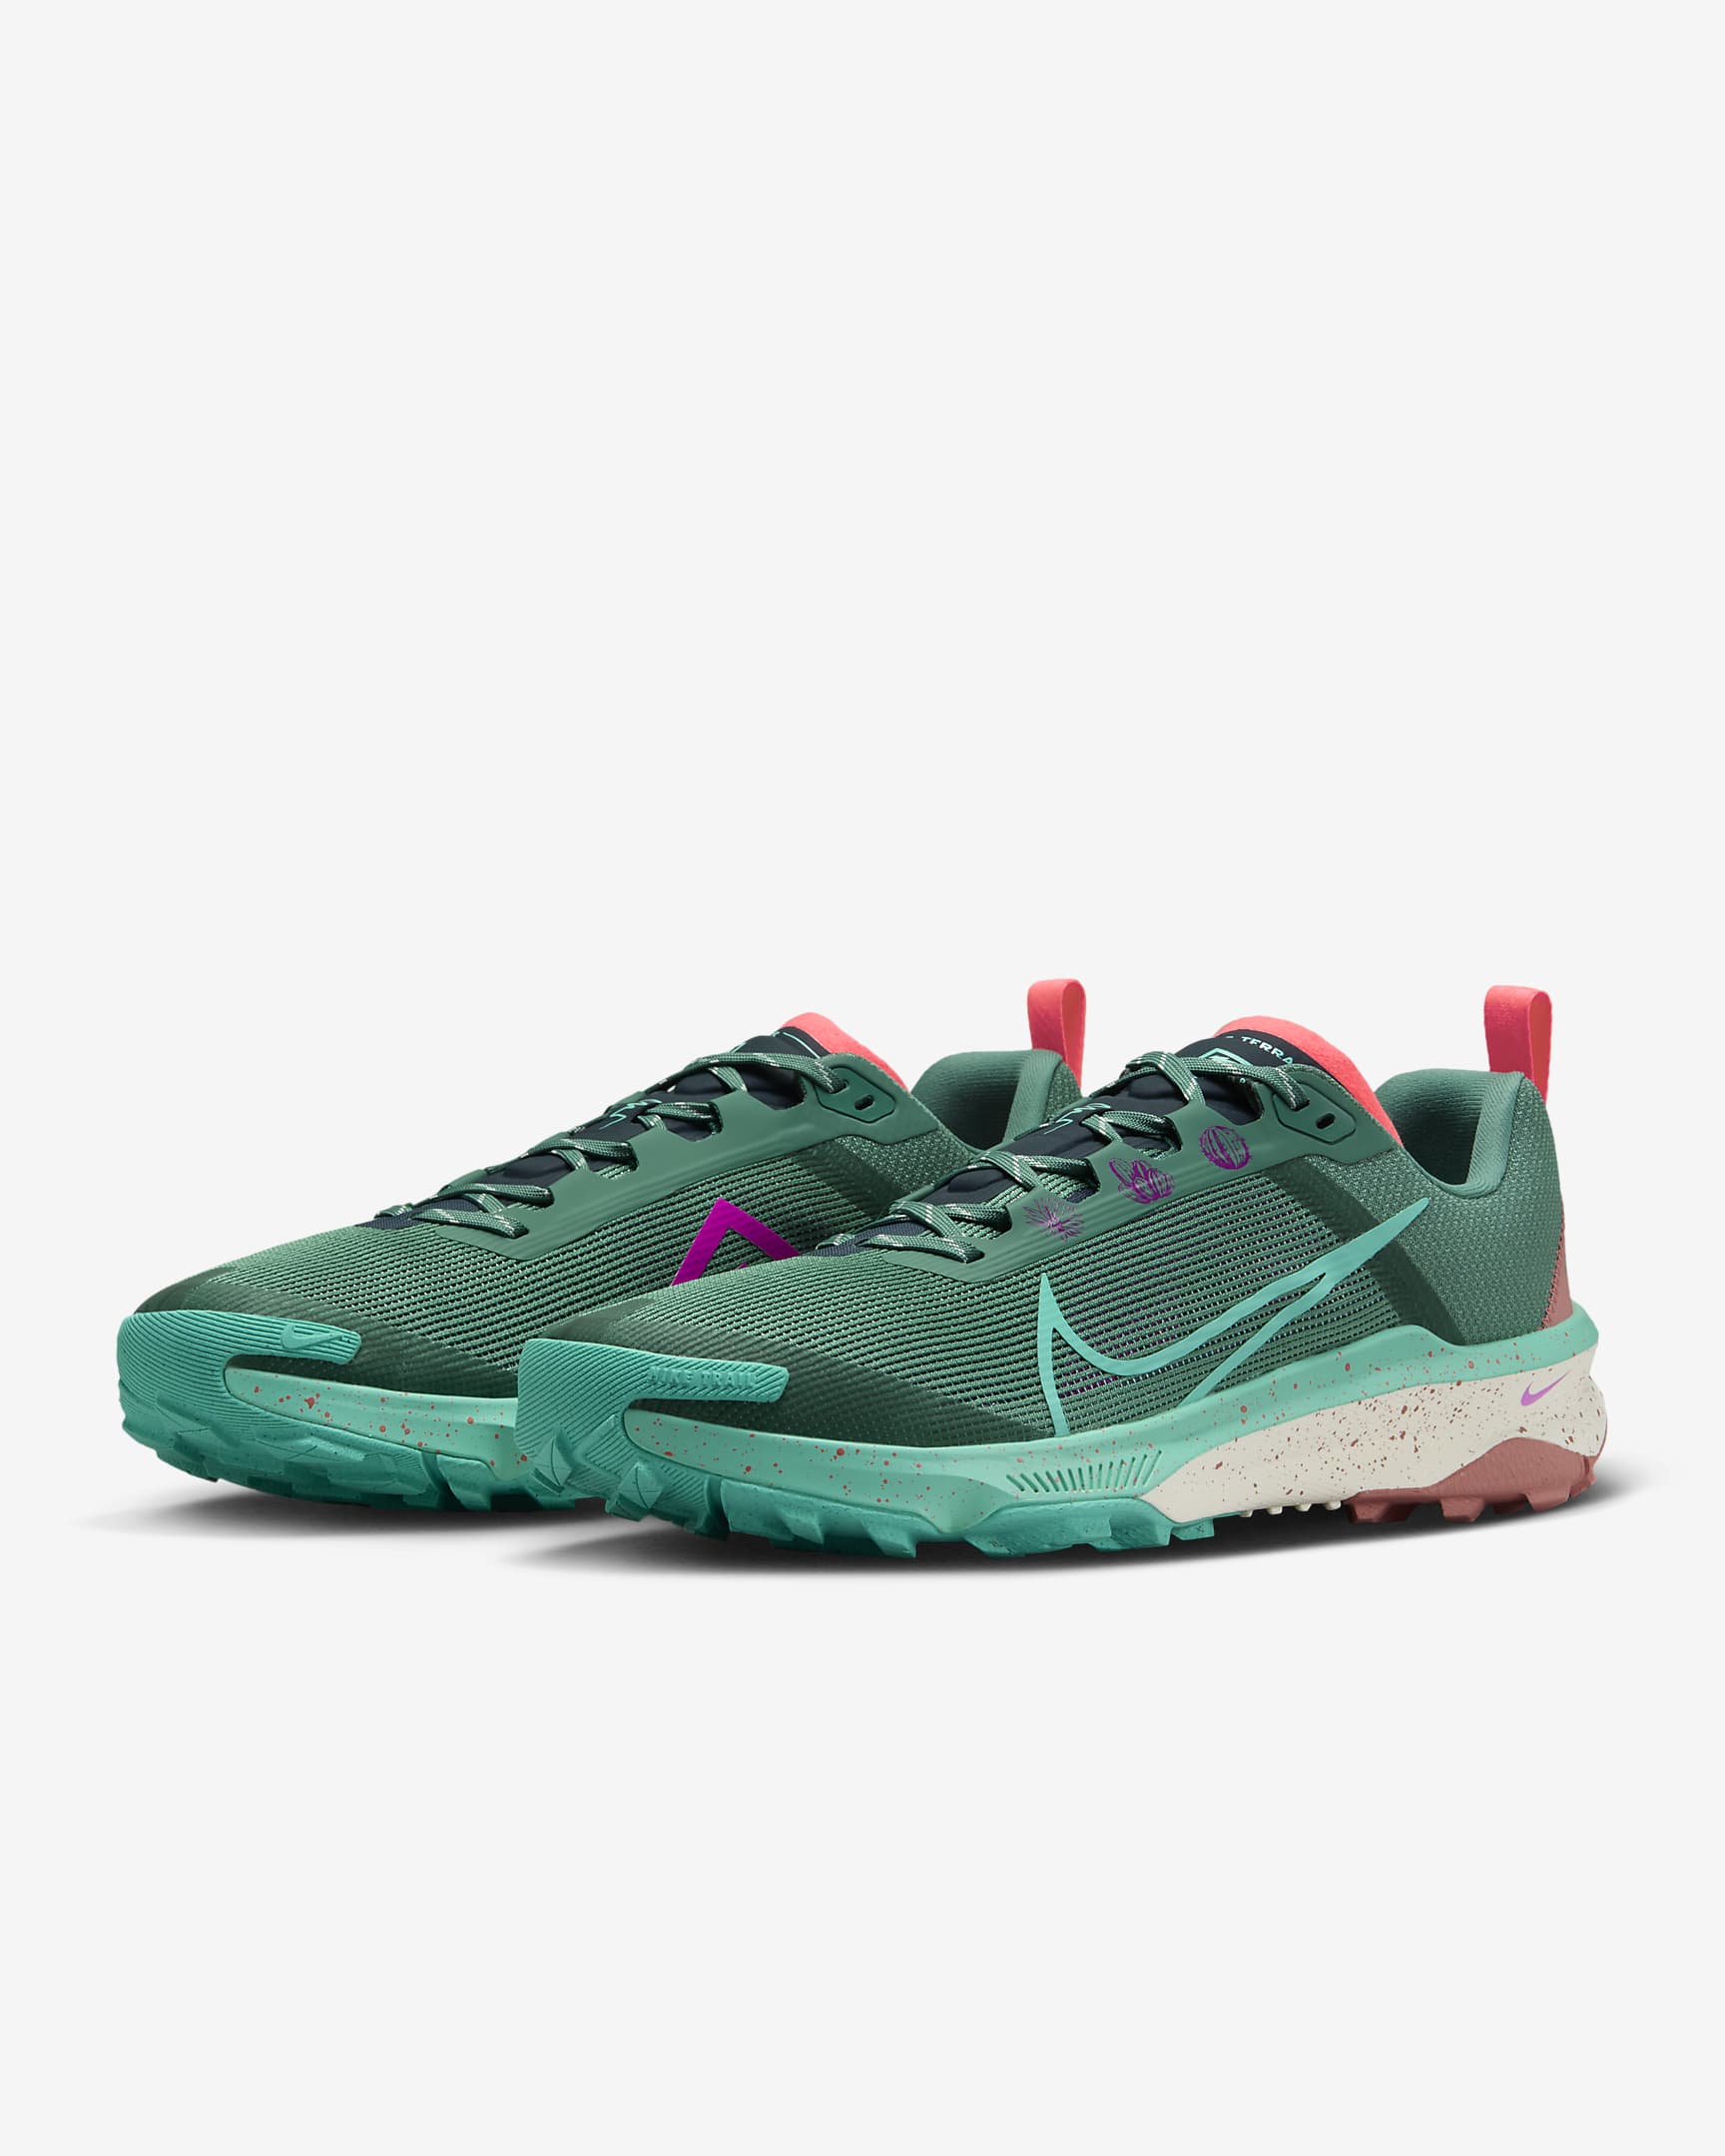 Nike Kiger 9 Men's Trail-Running Shoes - Bicoastal/Armoury Navy/Red Stardust/Green Frost